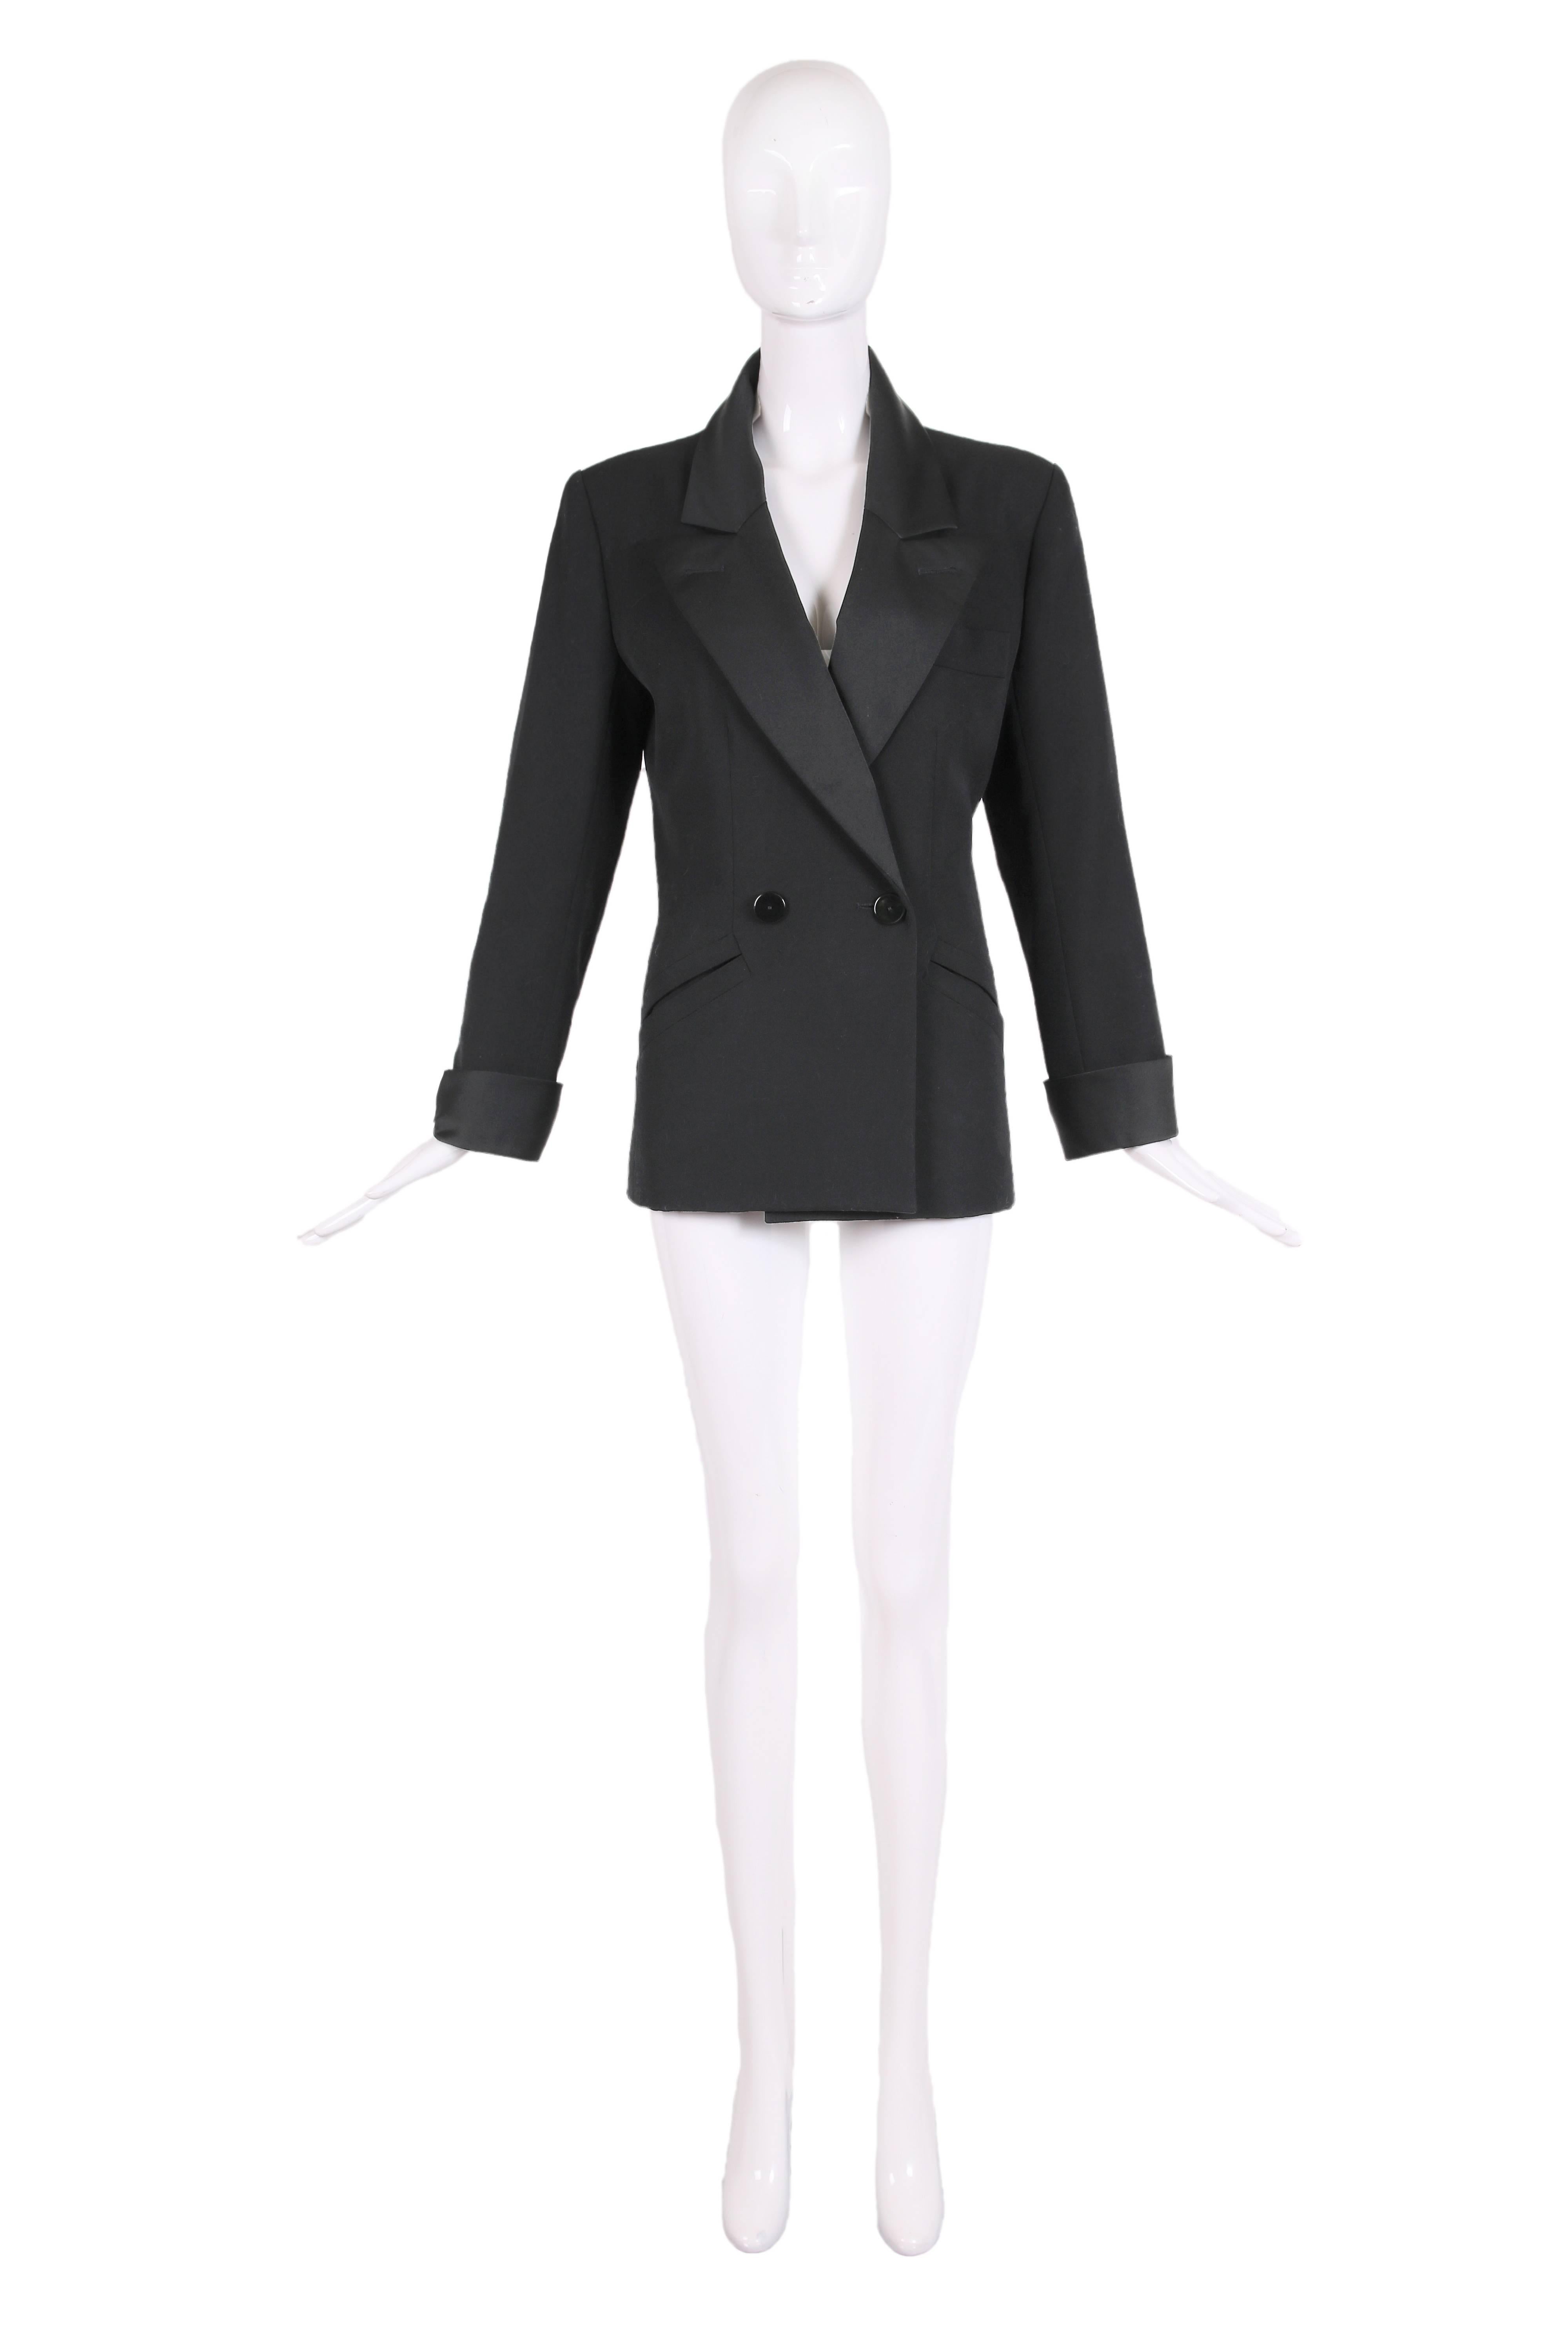 Vintage Yves Saint Laurent black tuxedo jacket with satin lapels and cuffs. The jacket is double breasted with two frontal button closures and a single decorative button at each sleeve cuff. The front also has one handkerchief pocket at the breast